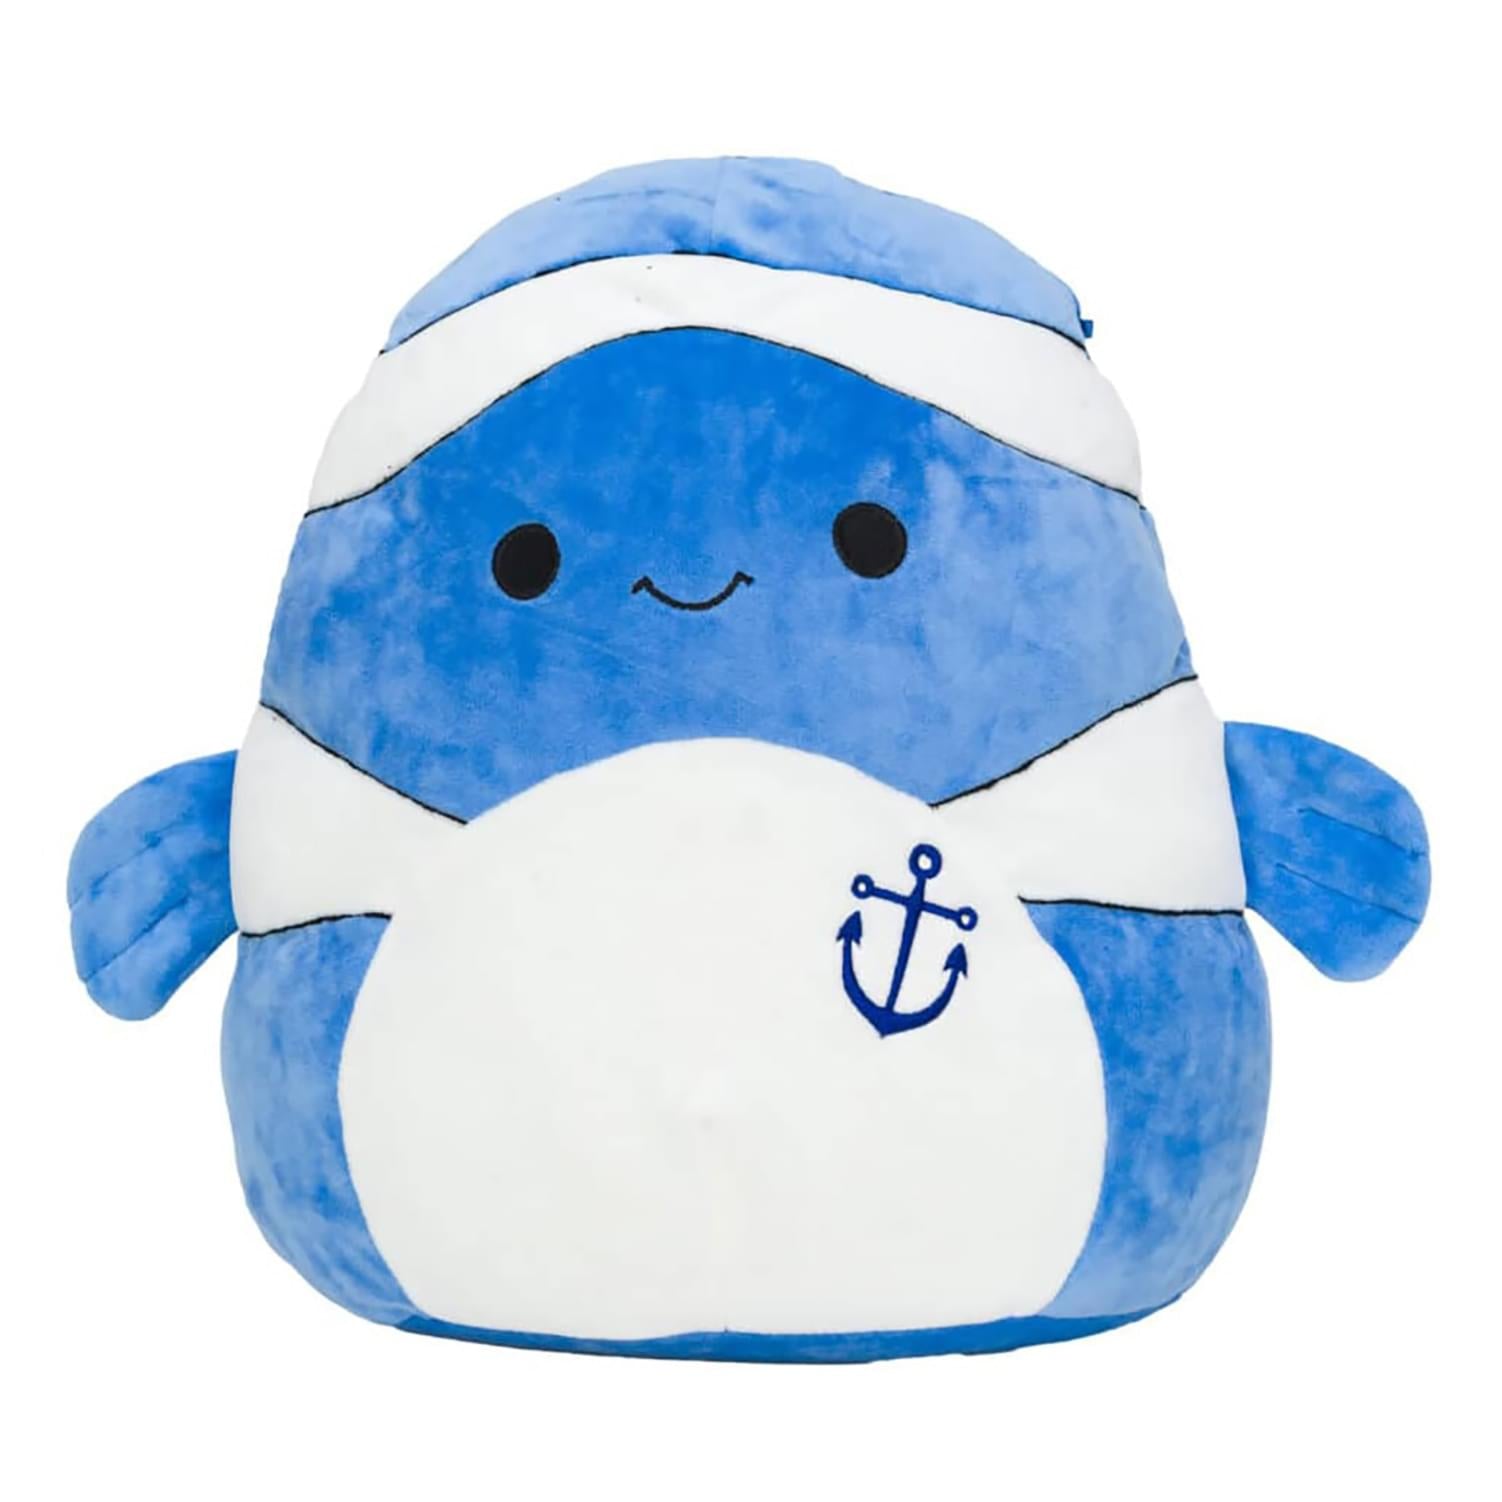 Squishmallow 8 Inch Plush | Ricky the Blue Clownfish